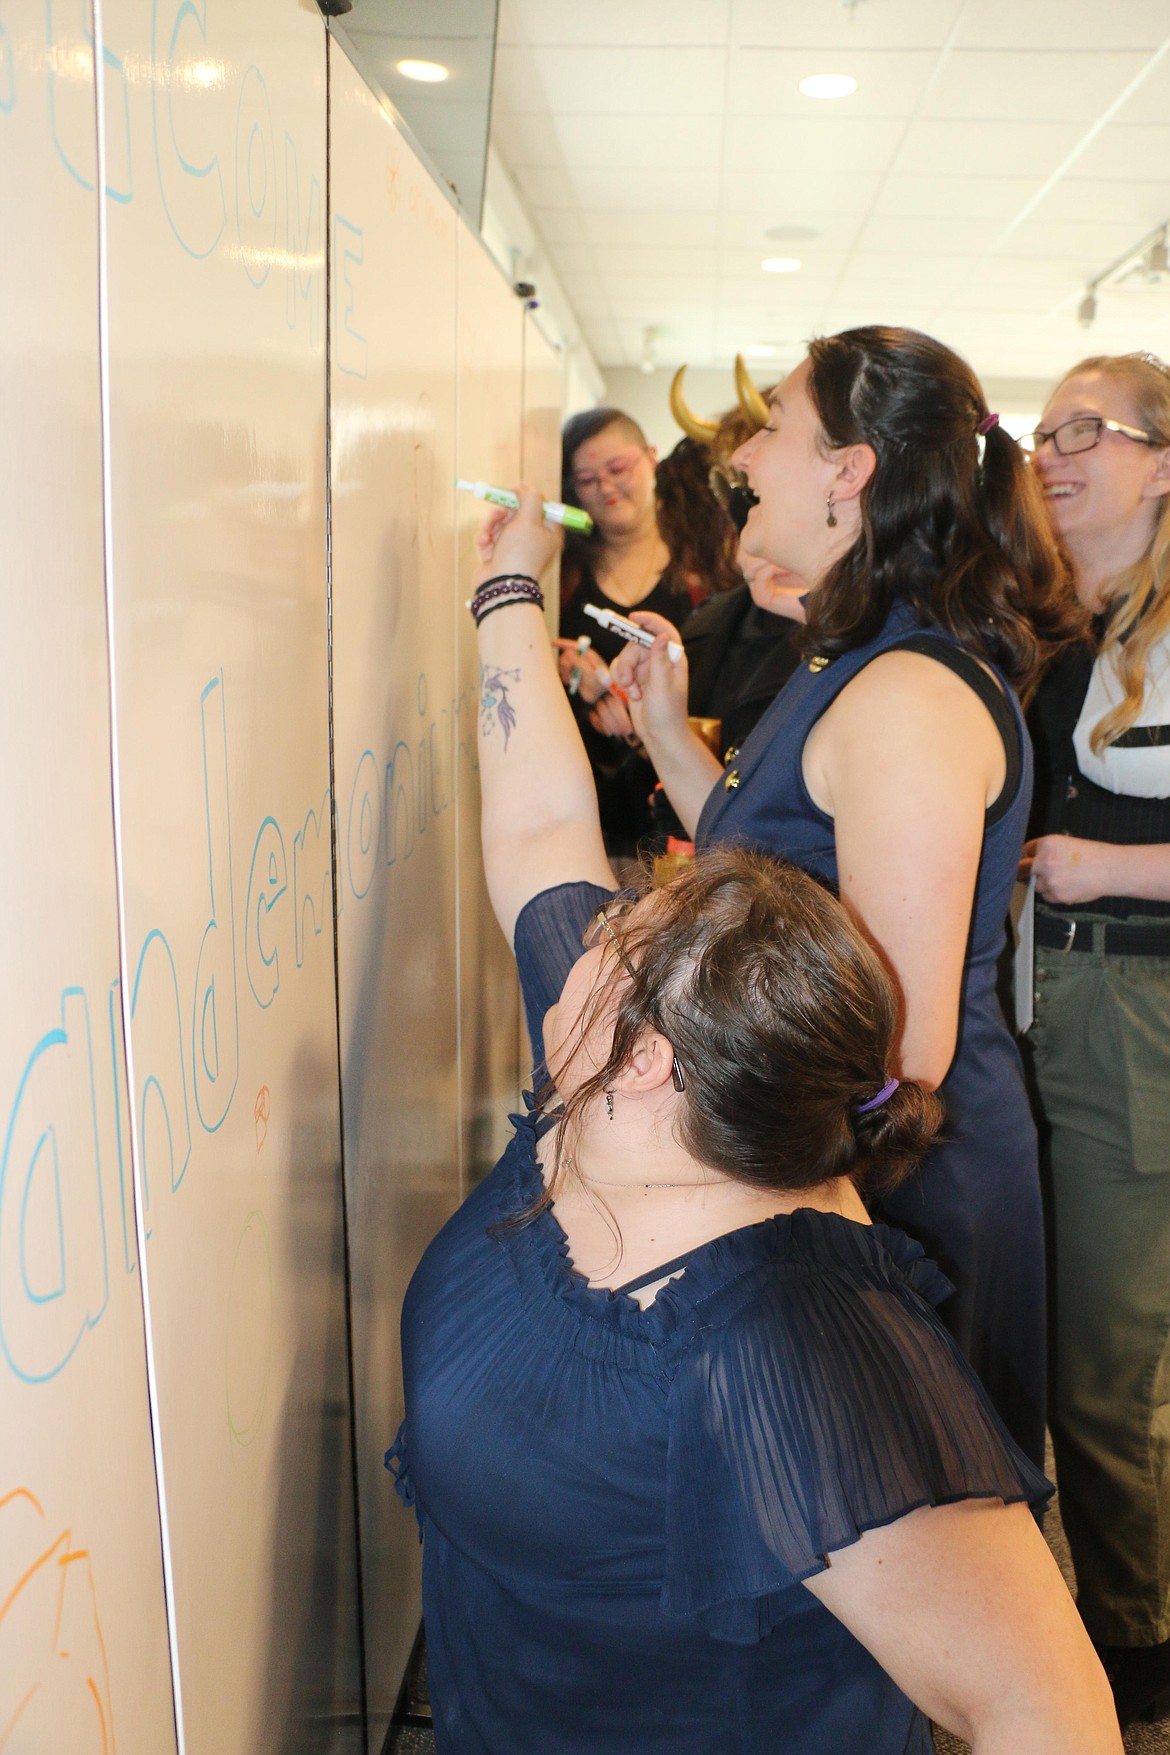 Sandemonium Lite attendees laugh as they add messages to a white board set up at the mid-May event for notes, drawings and more.